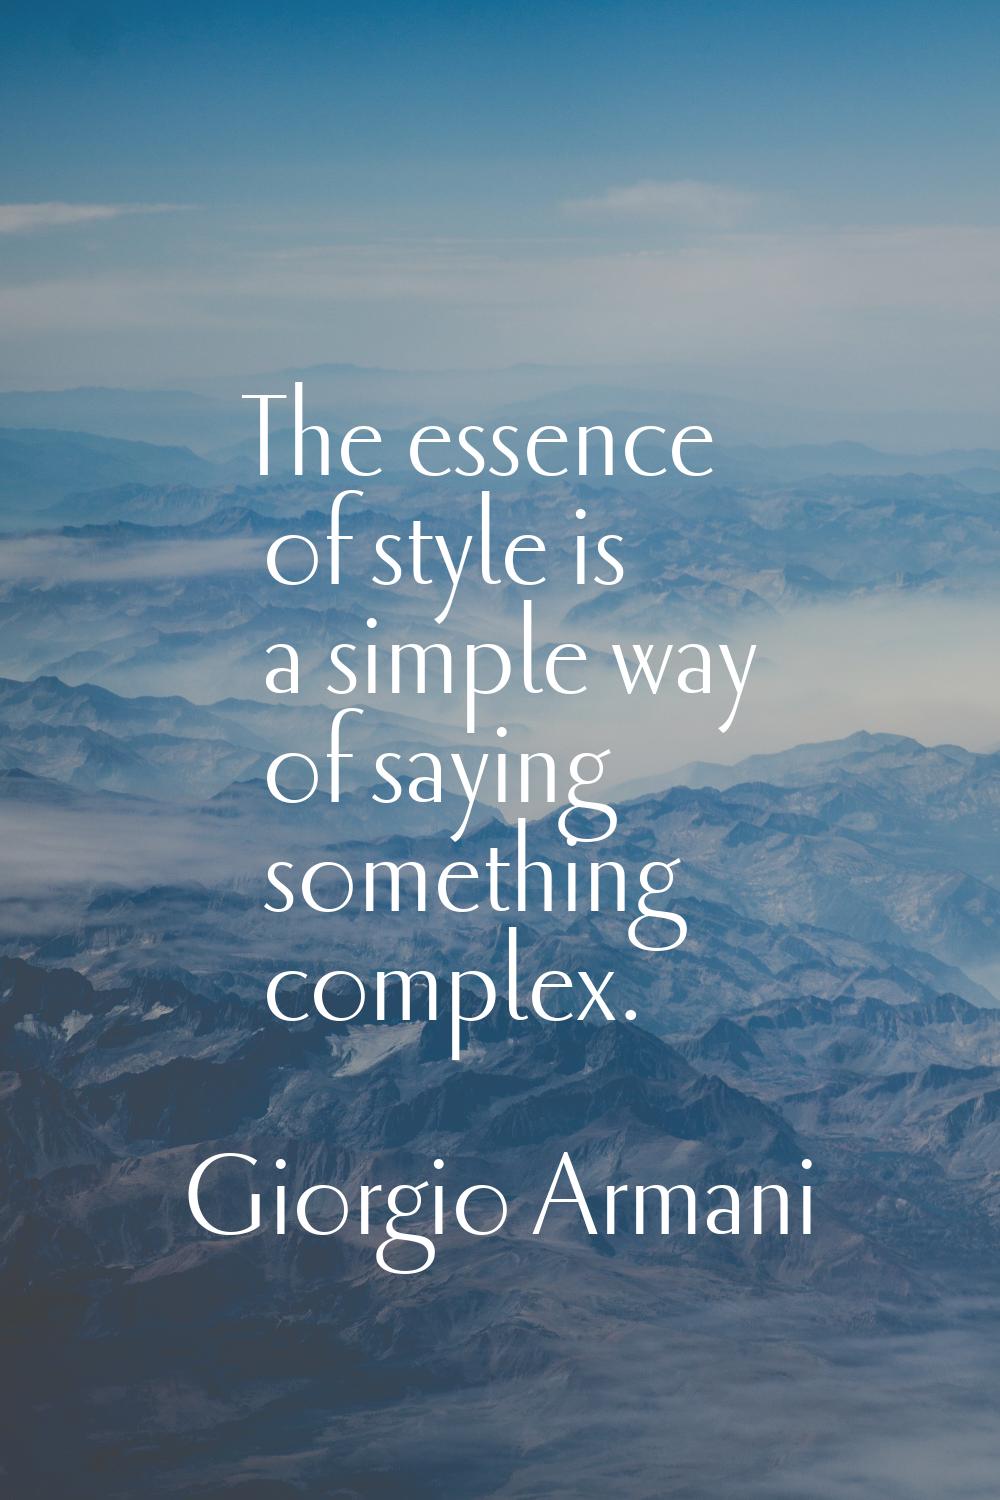 The essence of style is a simple way of saying something complex.